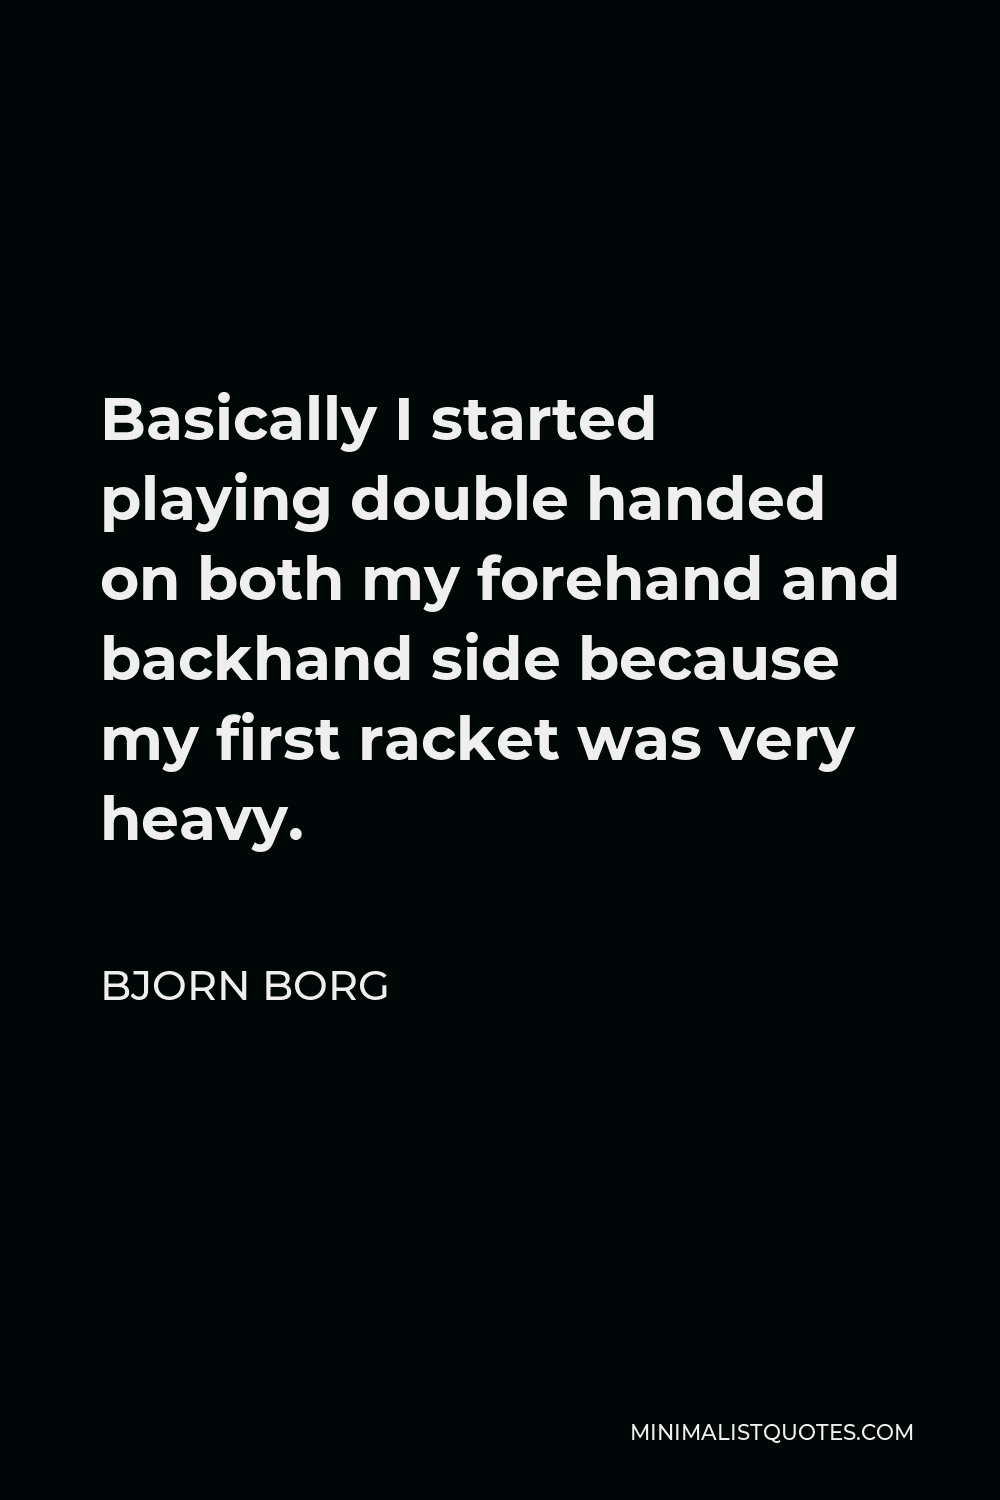 Bjorn Borg Quote - Basically I started playing double handed on both my forehand and backhand side because my first racket was very heavy.